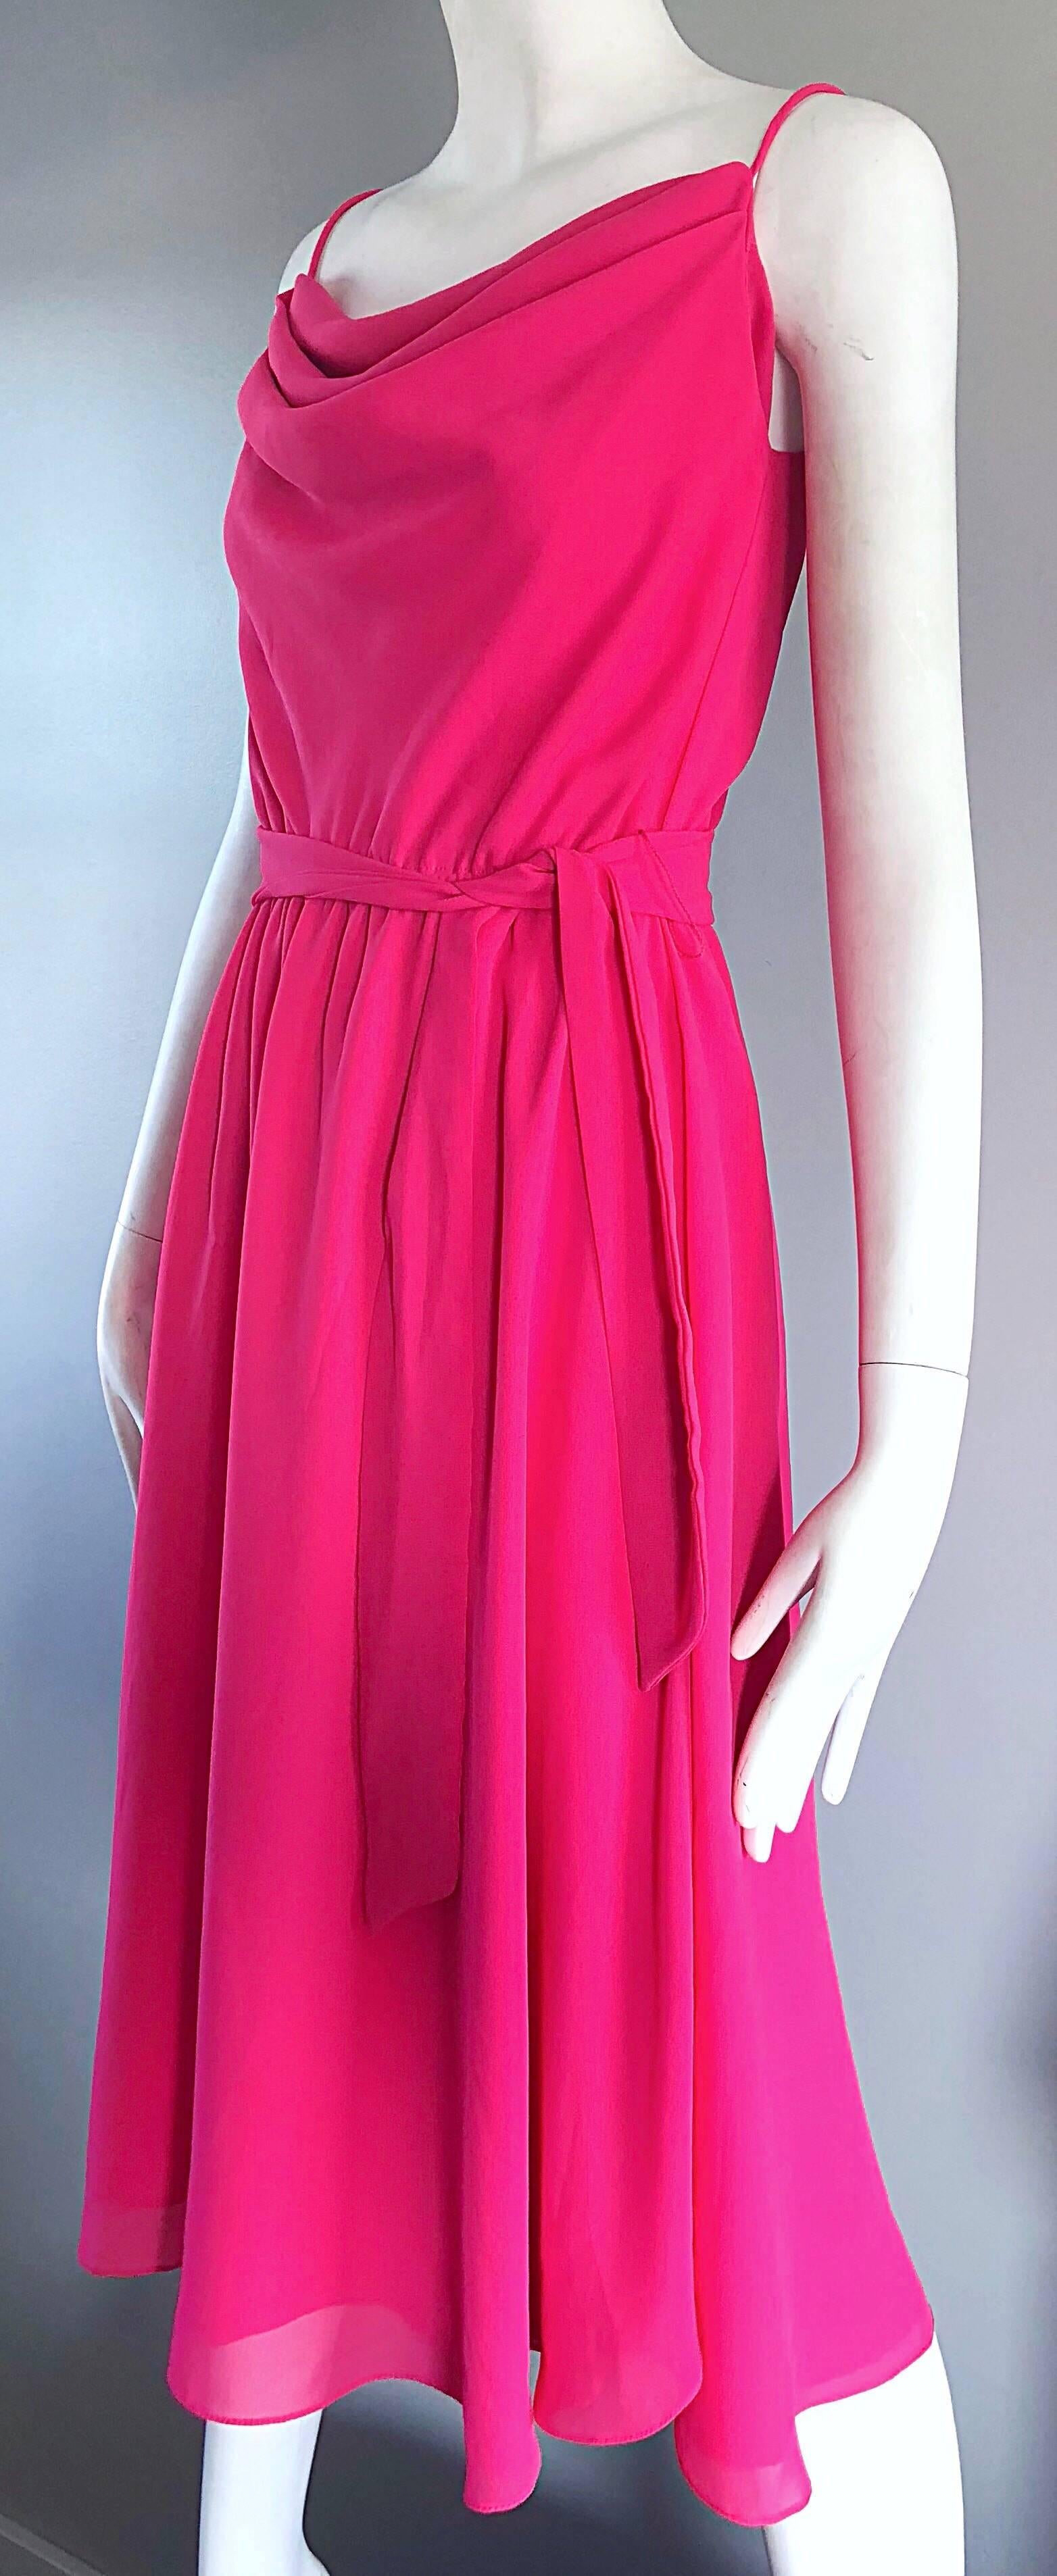 1970s Phillipe Jodur for Ferrali Hot Pink Crepe Sleeveless Belted Disco Dress In Excellent Condition For Sale In San Diego, CA